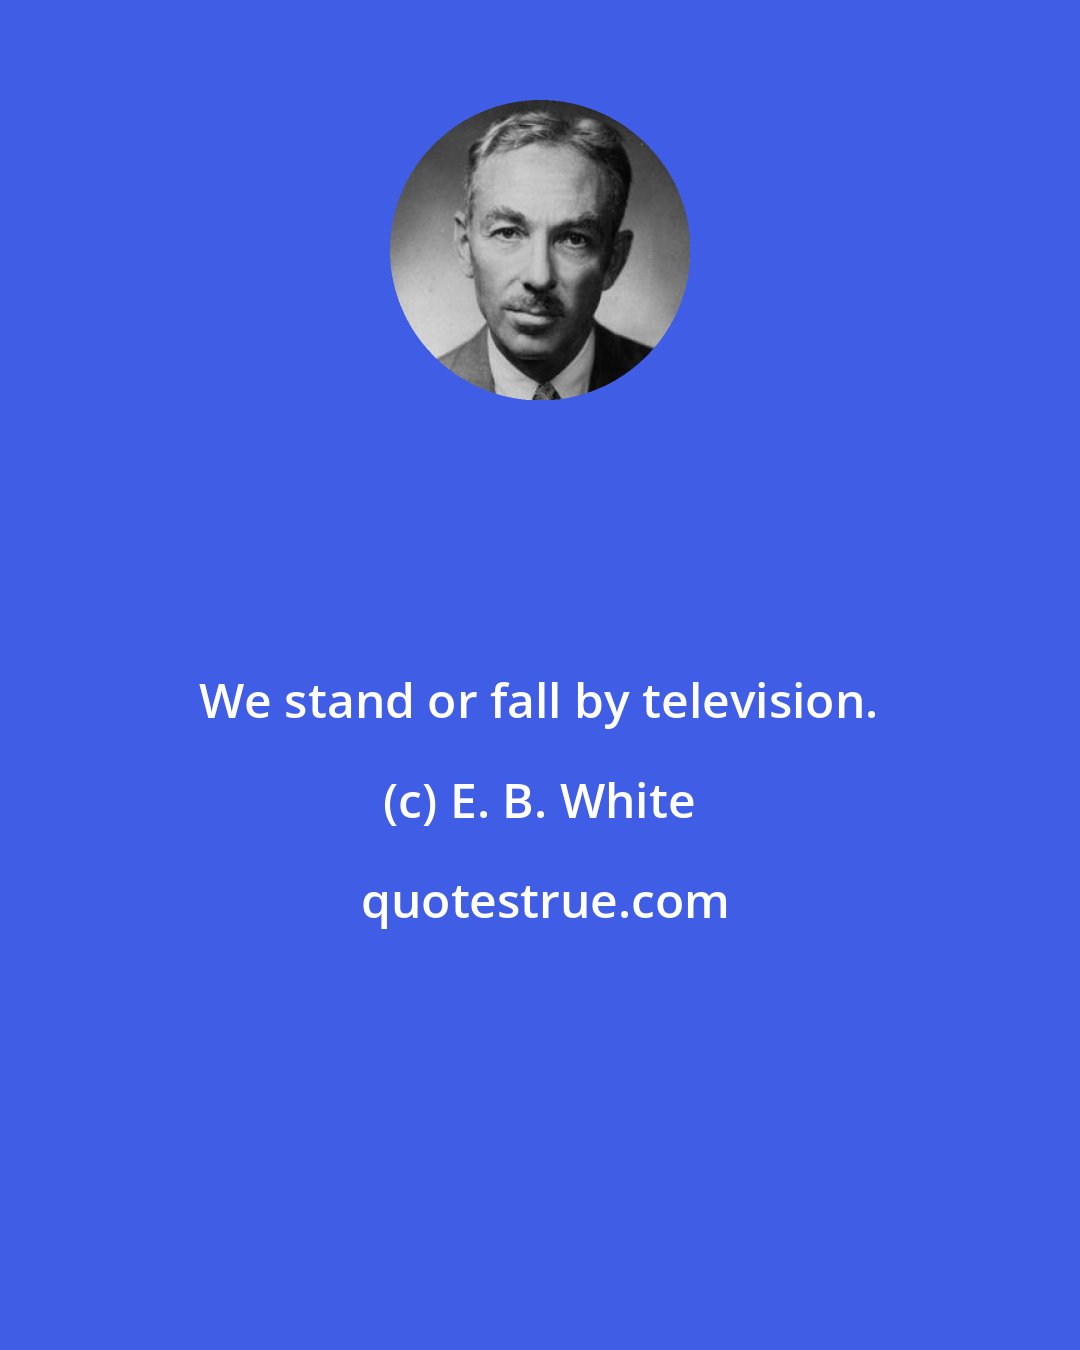 E. B. White: We stand or fall by television.